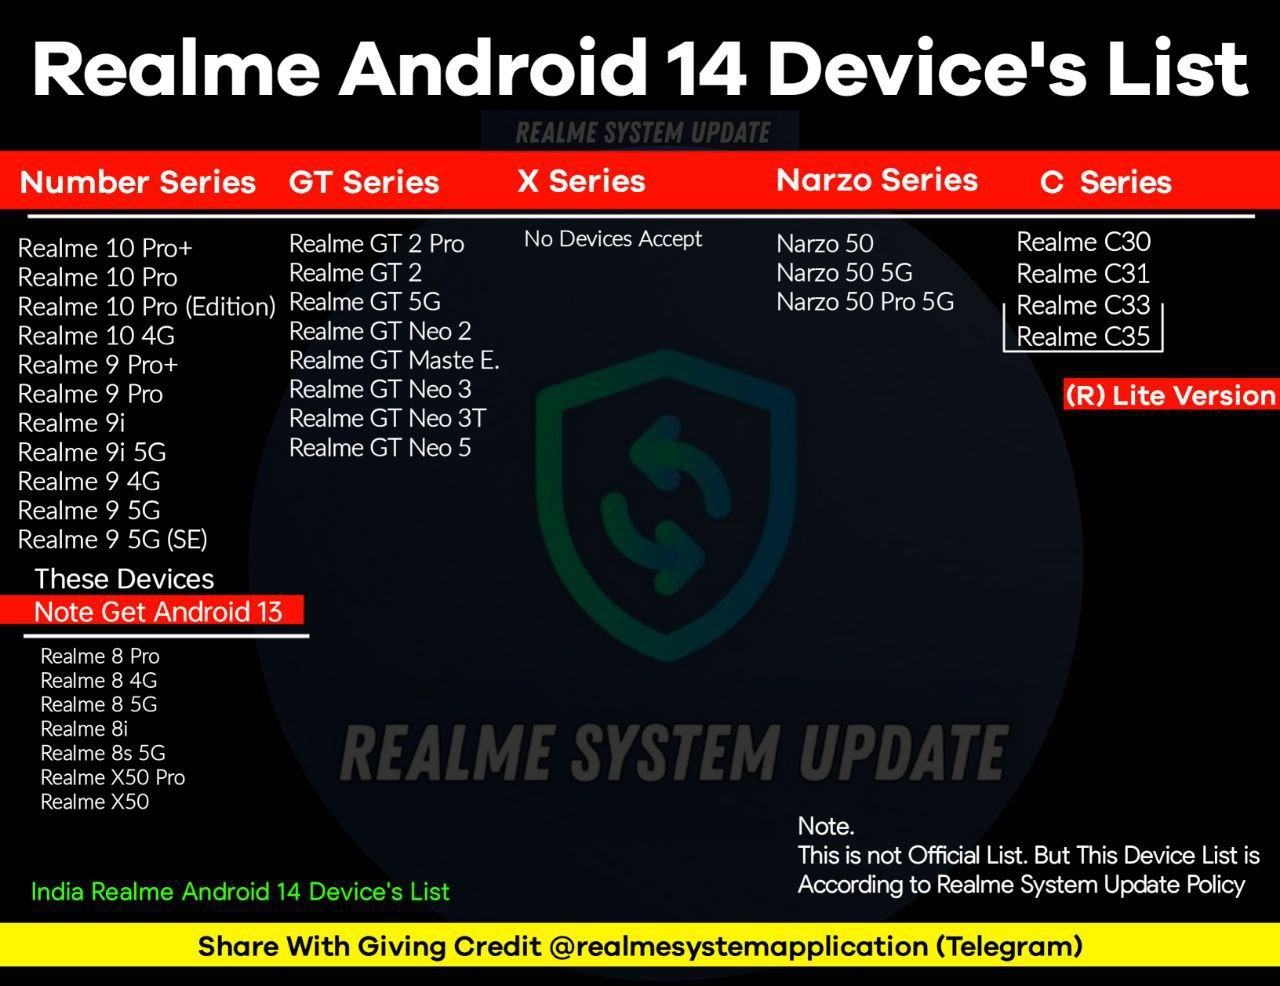 Realme UI 5.0 Eligible Devices, Realme UI 5.0 Supported Devices, Realme Ui 5.0 Device List